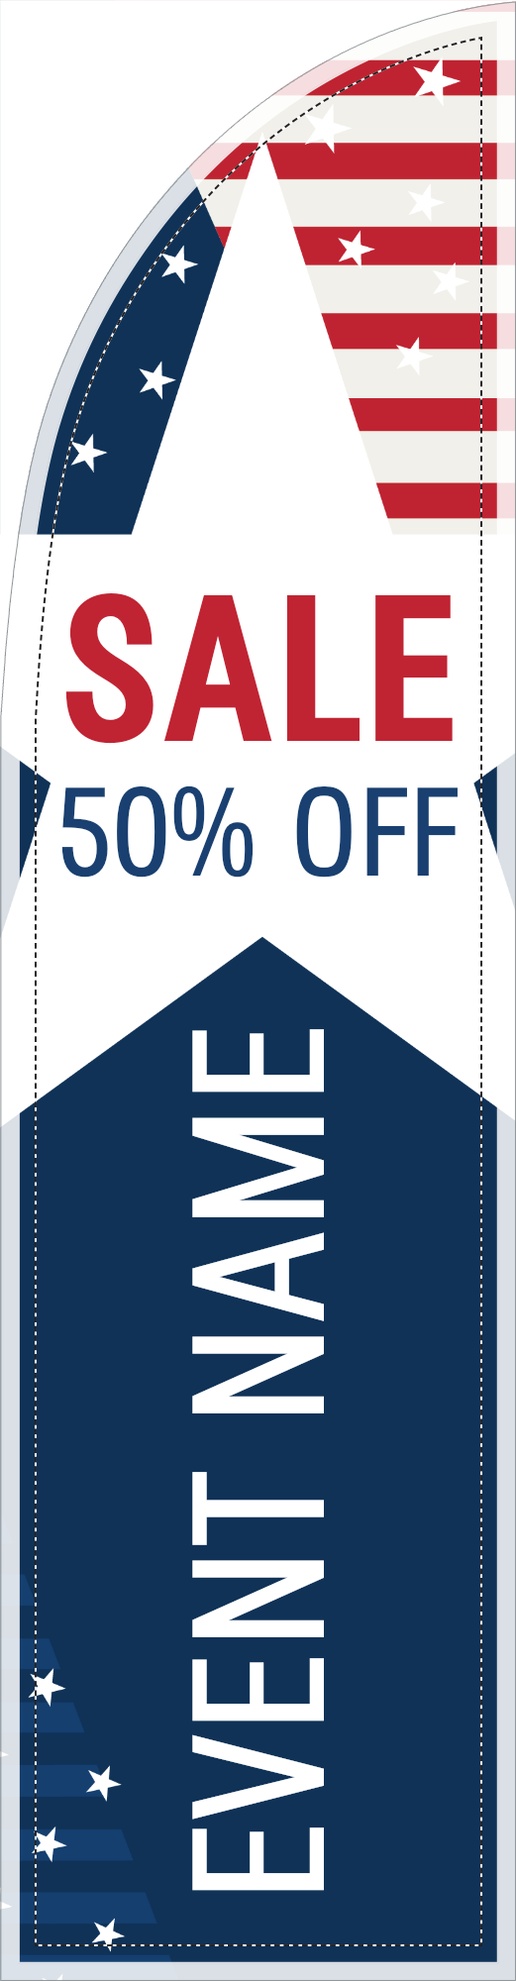 A patriotic united states blue white design for Coupons